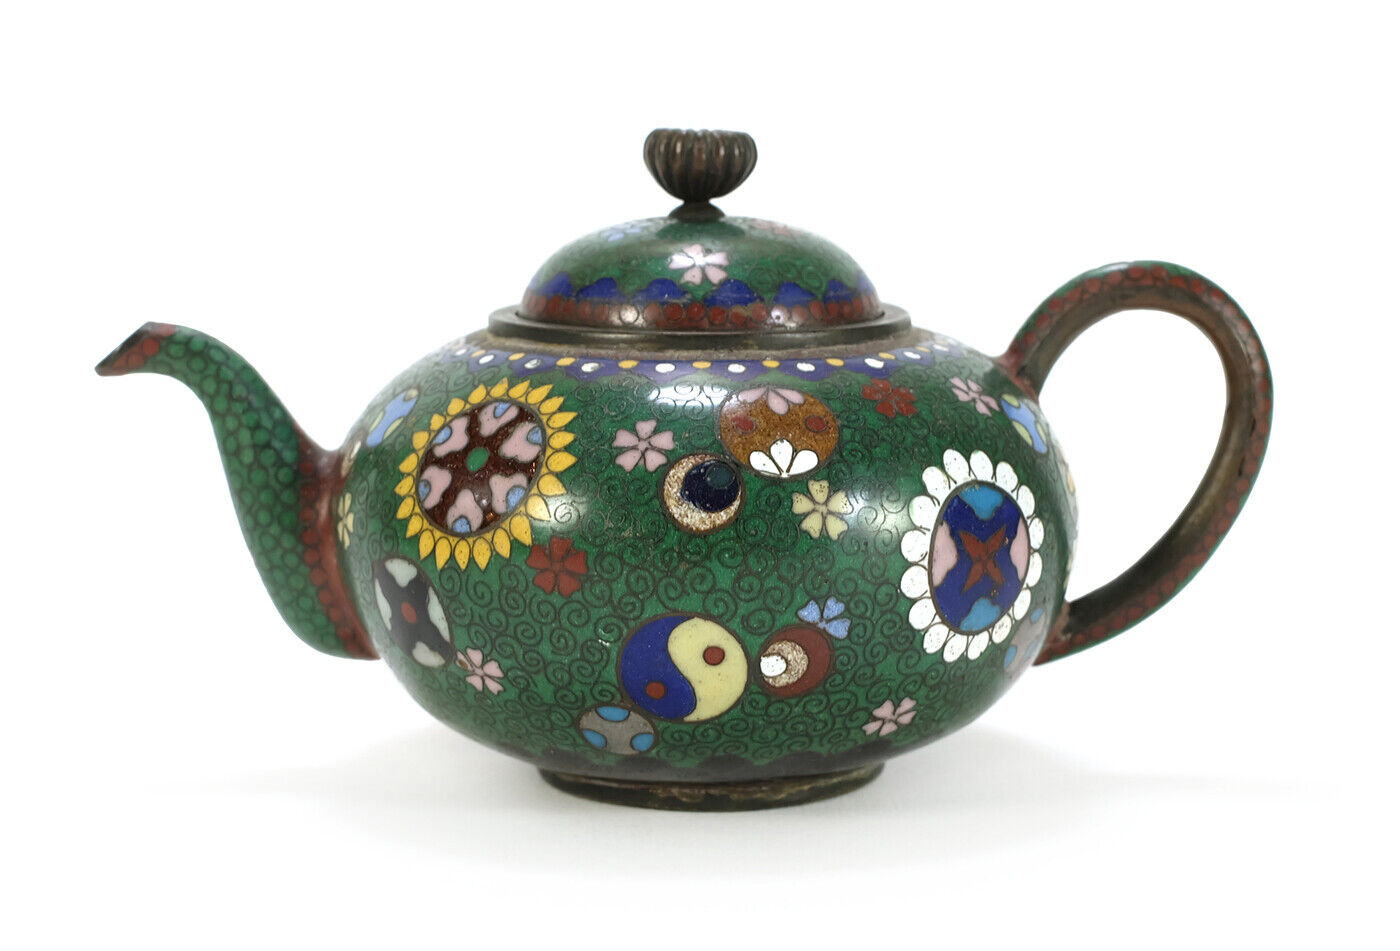 Meiji Period Japanese Antique Small Cloisonne Teapot • 3.25" Tall Late-1800s